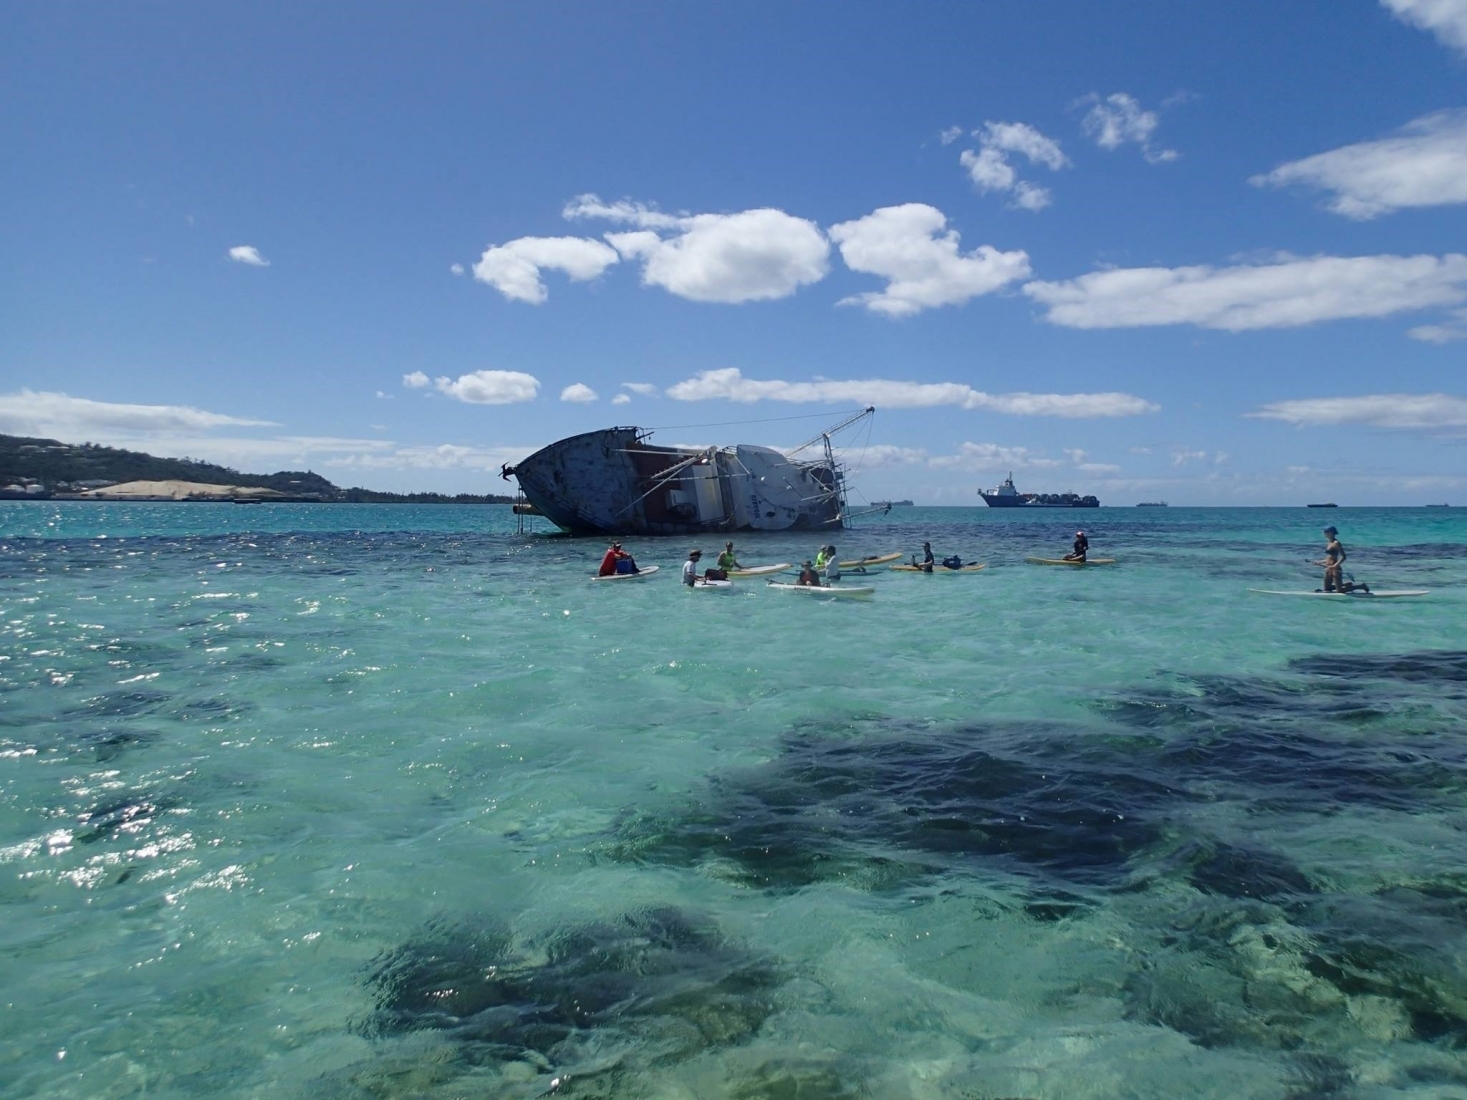 A derelict vessel on a reef.